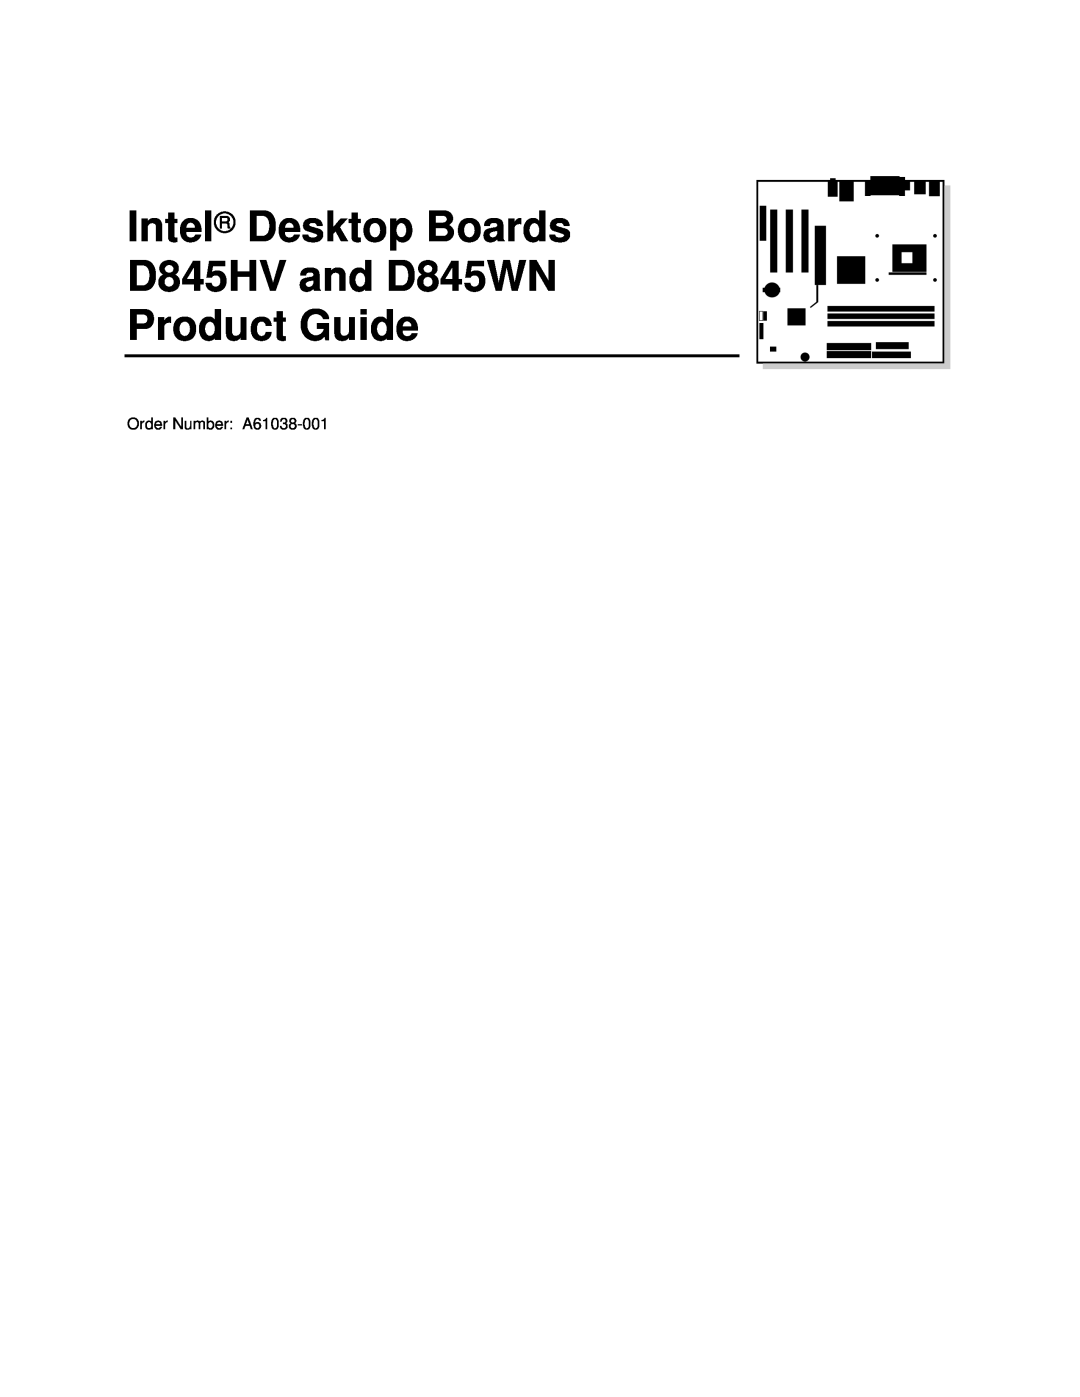 Intel manual Intel Desktop Boards D845HV and D845WN Product Guide, Order Number A61038-001 